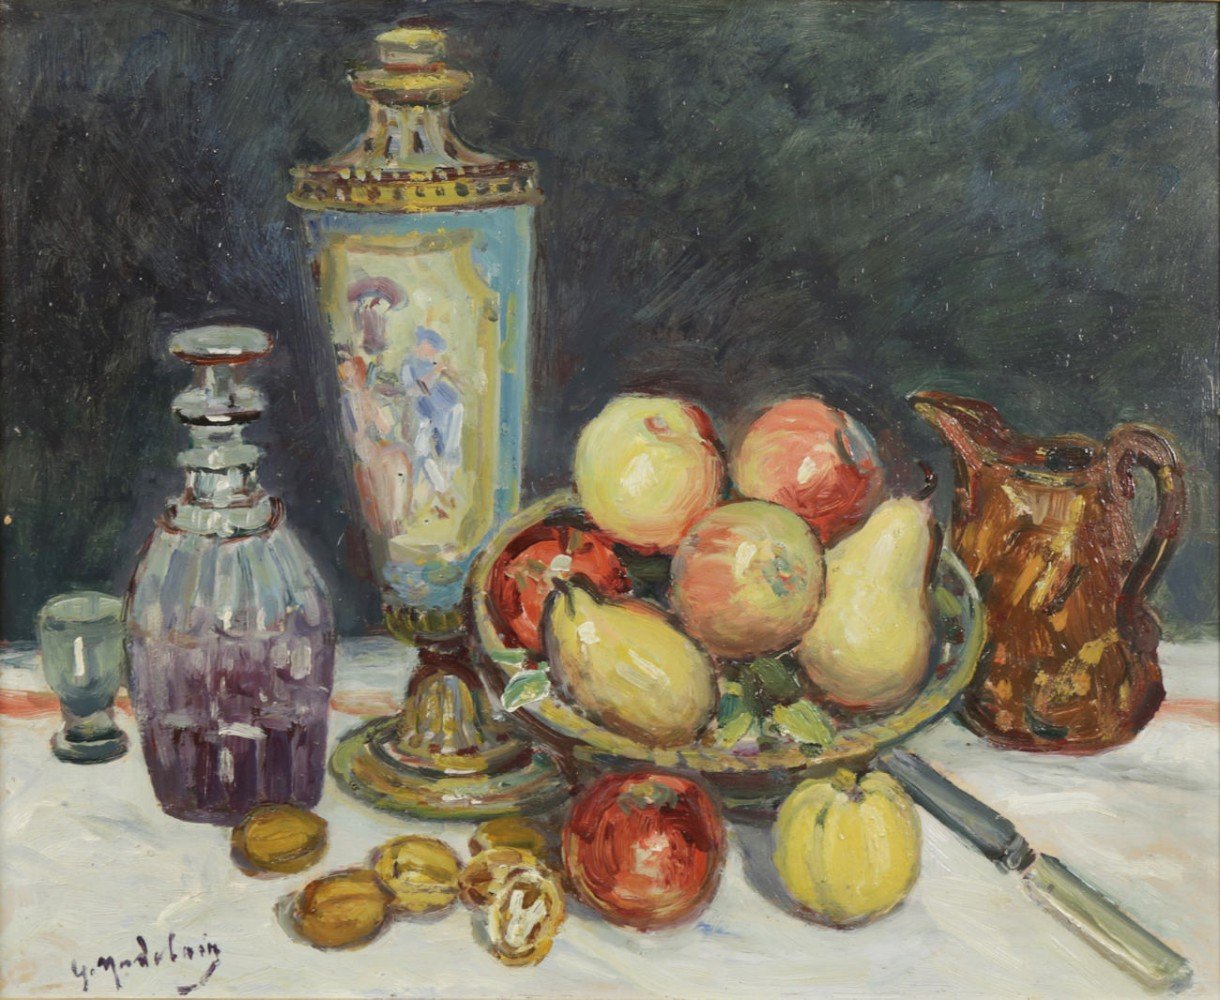 Gustave Madelain - Still Life with Fruit, Decanter, Vase and Jug by Gustave Madelain